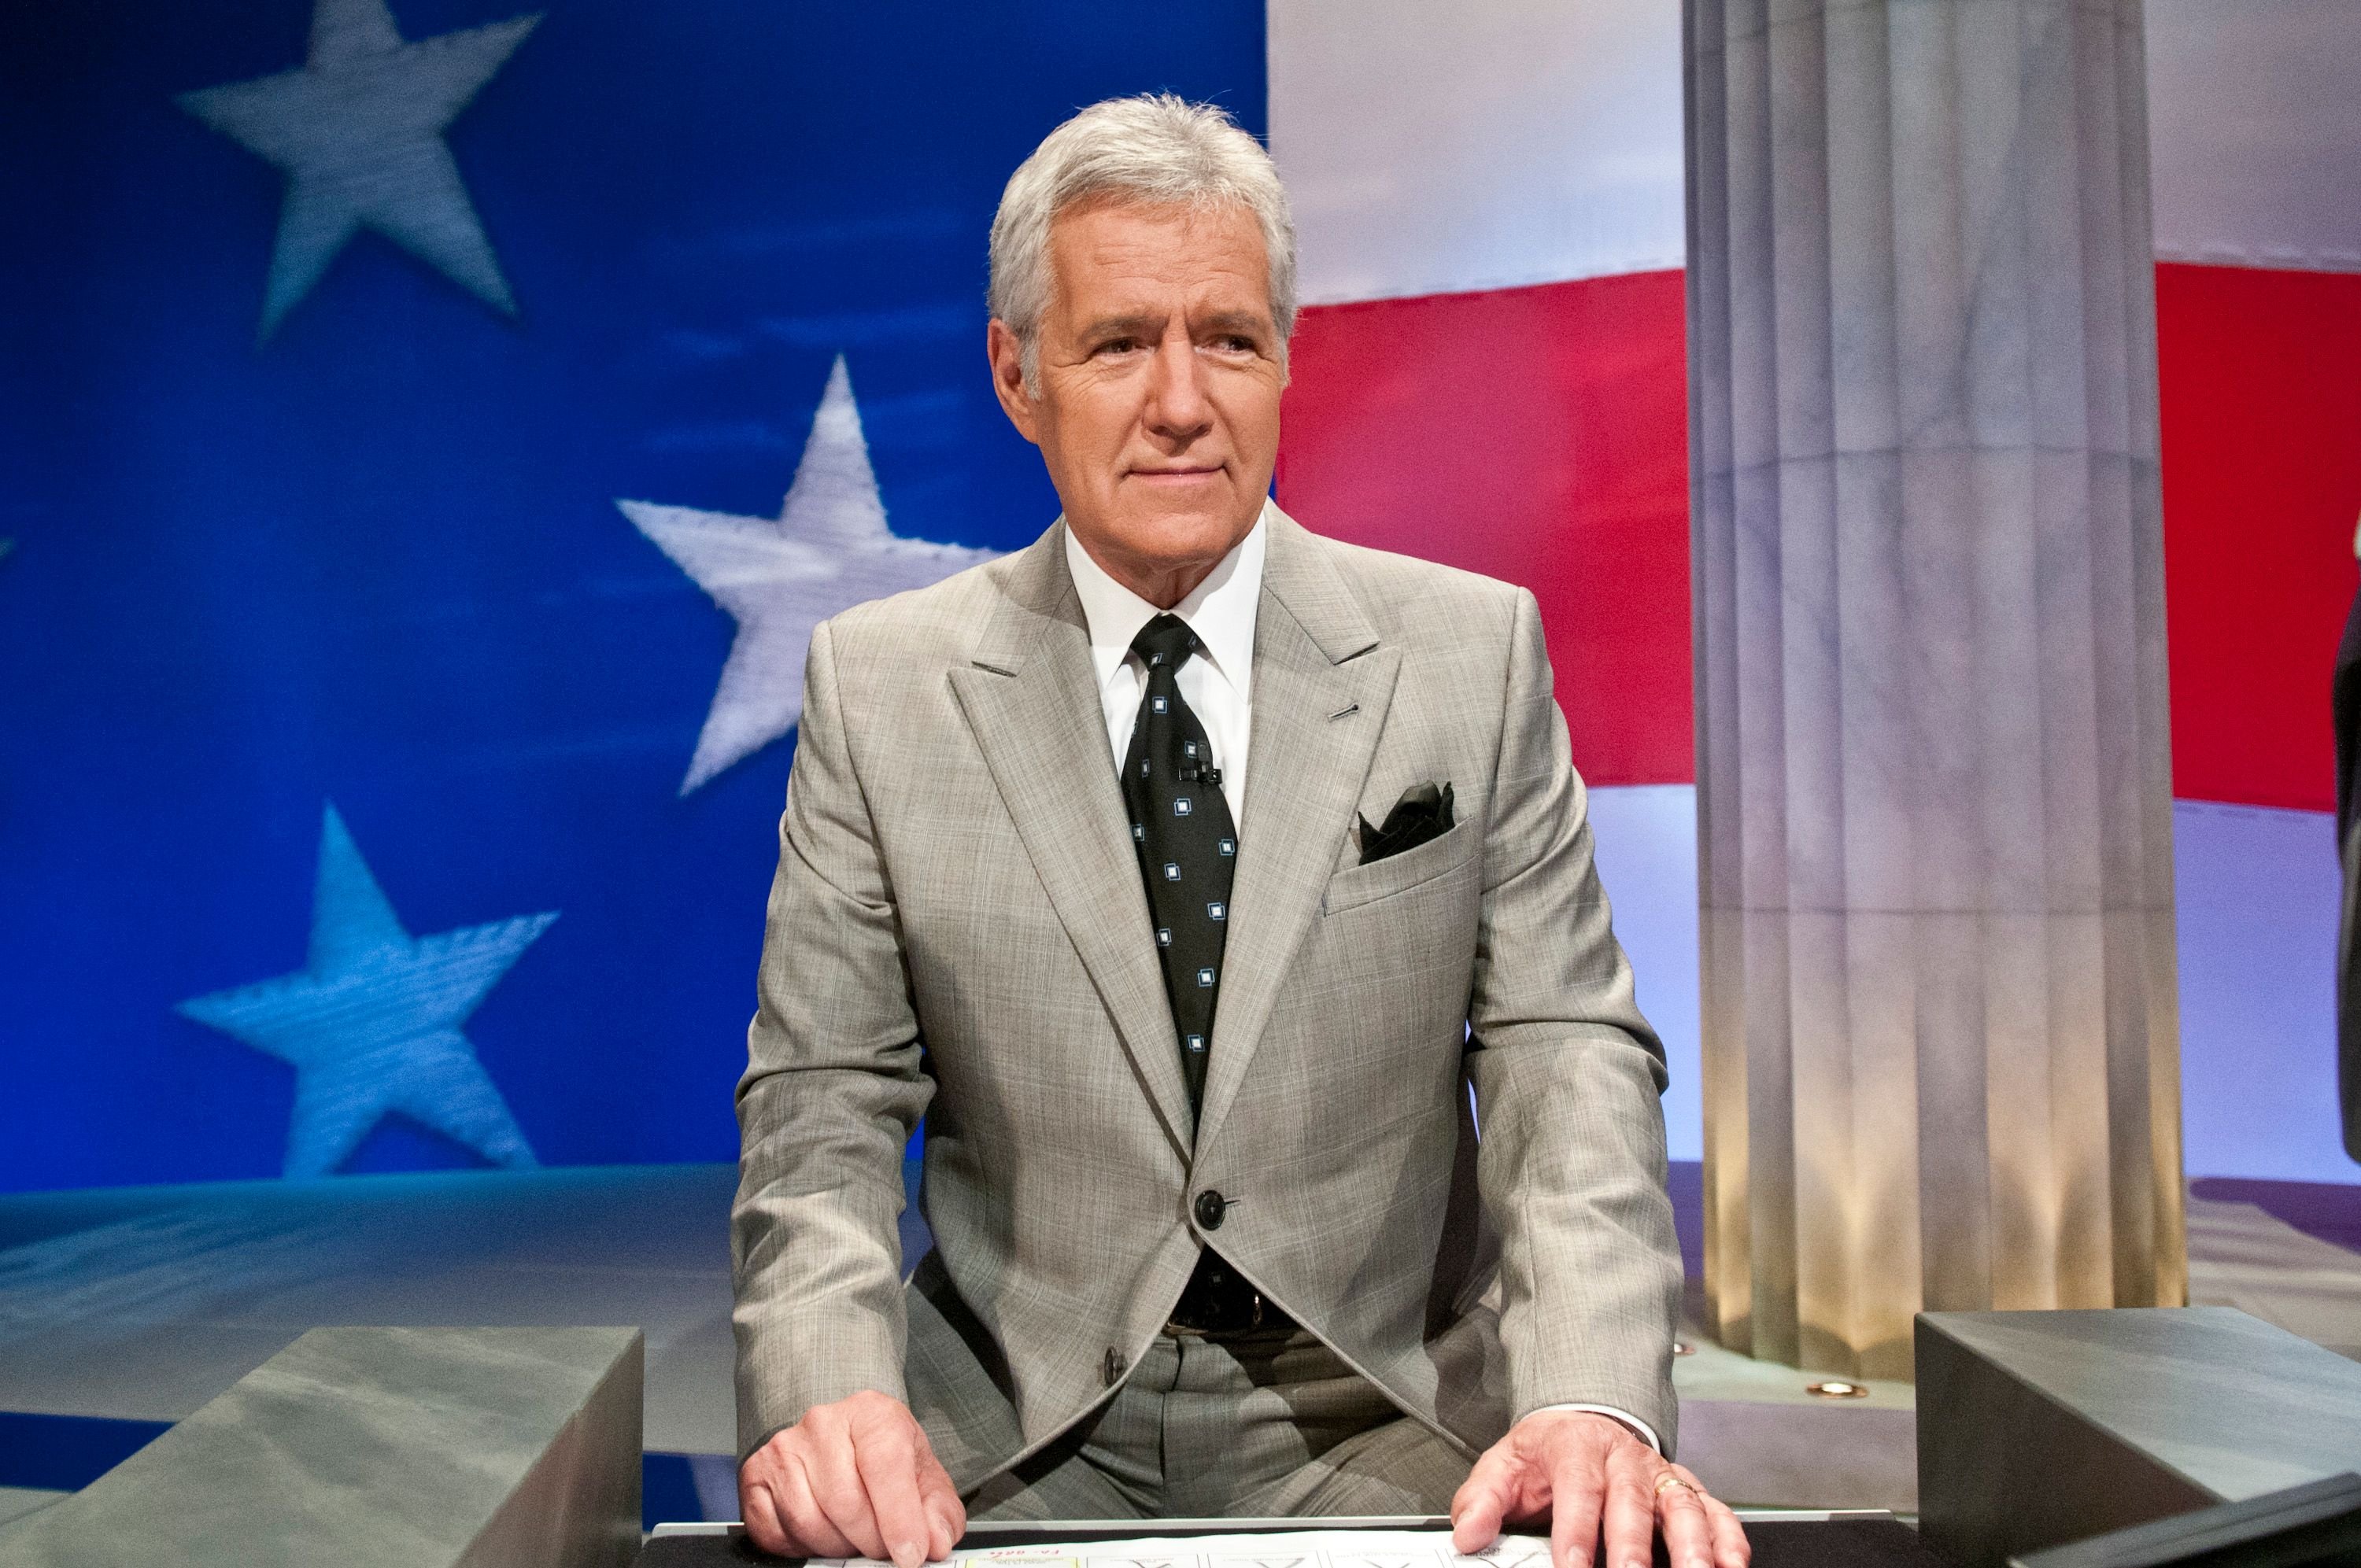 Alex Trebek during a rehearsal before a taping of "Jeopardy! Power Players Week" at DAR Constitution Hall in Washington, D.C. | Photo: Kris Connor/Getty Images